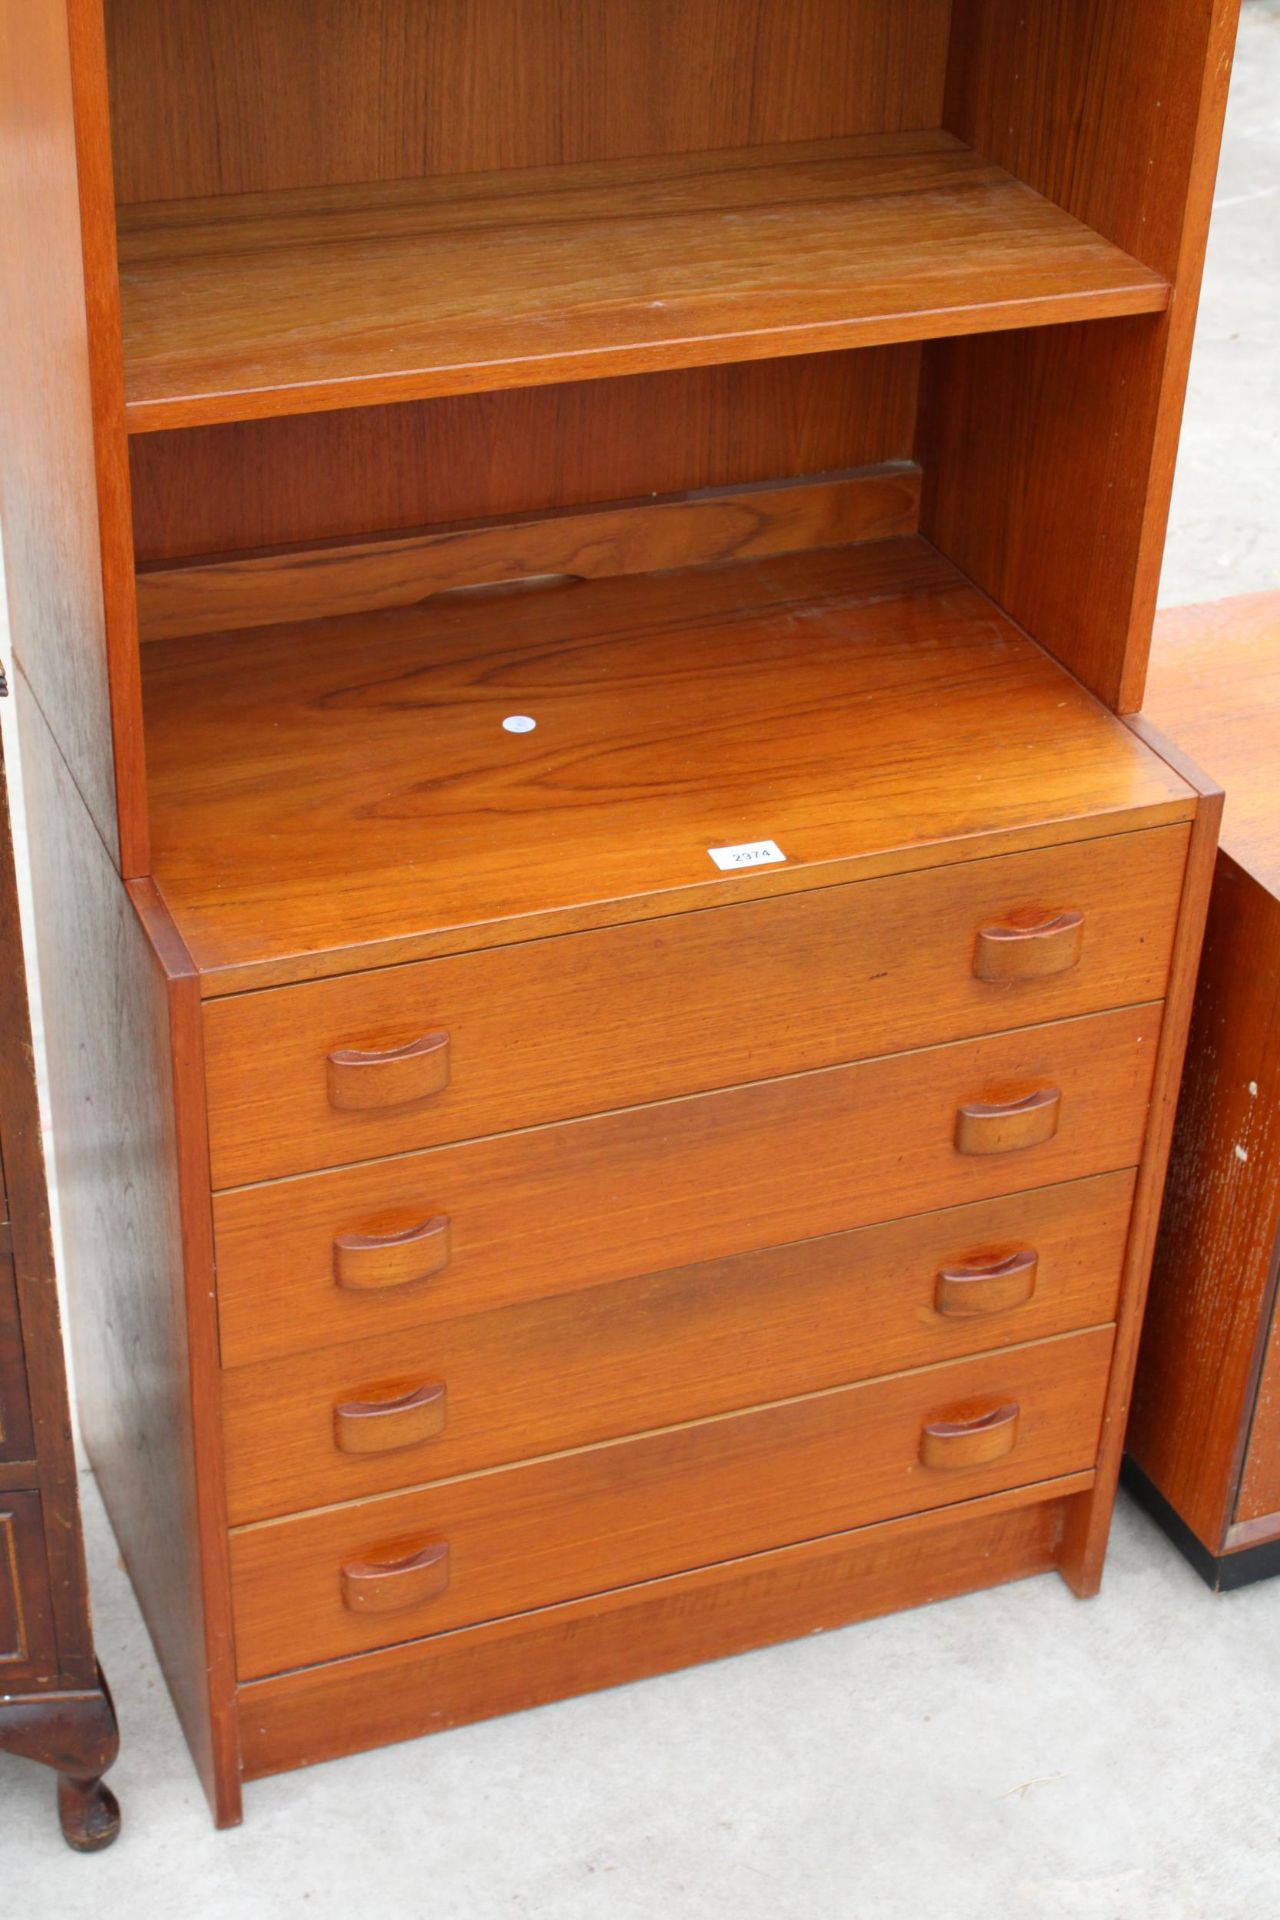 A MID CENTURY DANISH DOMINO DOBLER, RETRO TEAK BOOKCASE WITH FOUR LOWER DRAWERS - Image 2 of 5